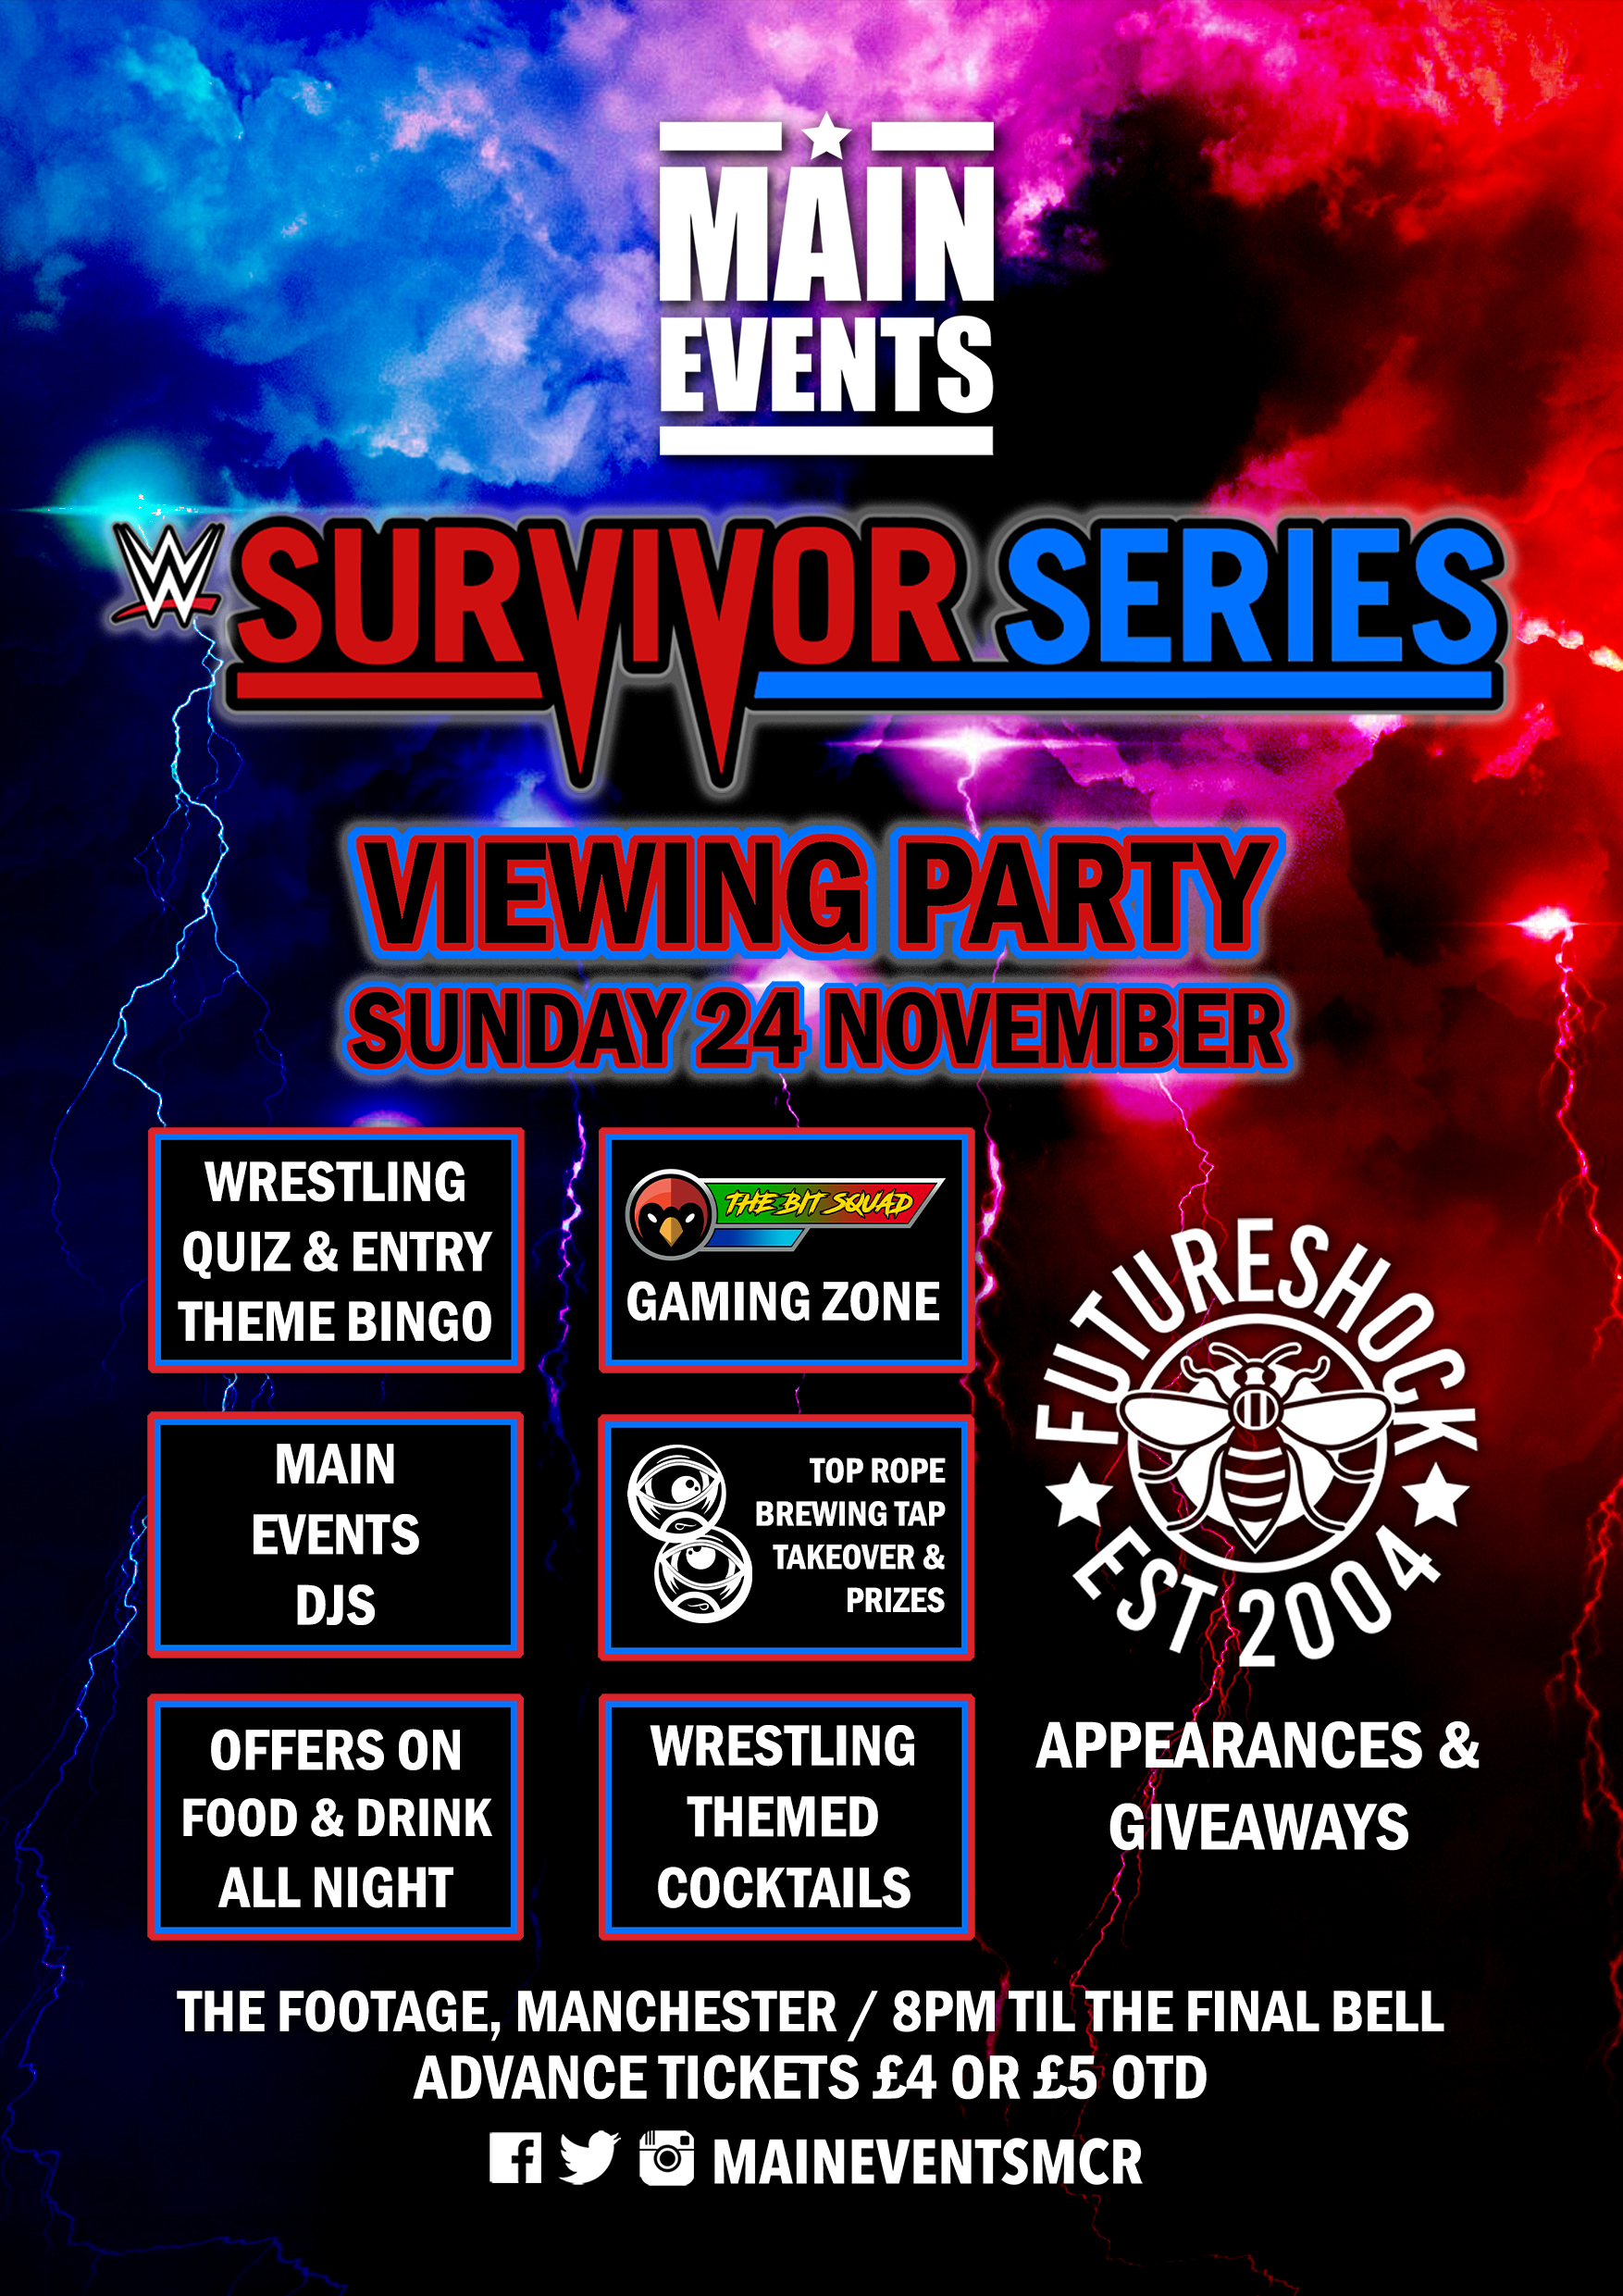 Main Events - Survivor Series 2019 Viewing Party Manchester - Footage Manchester